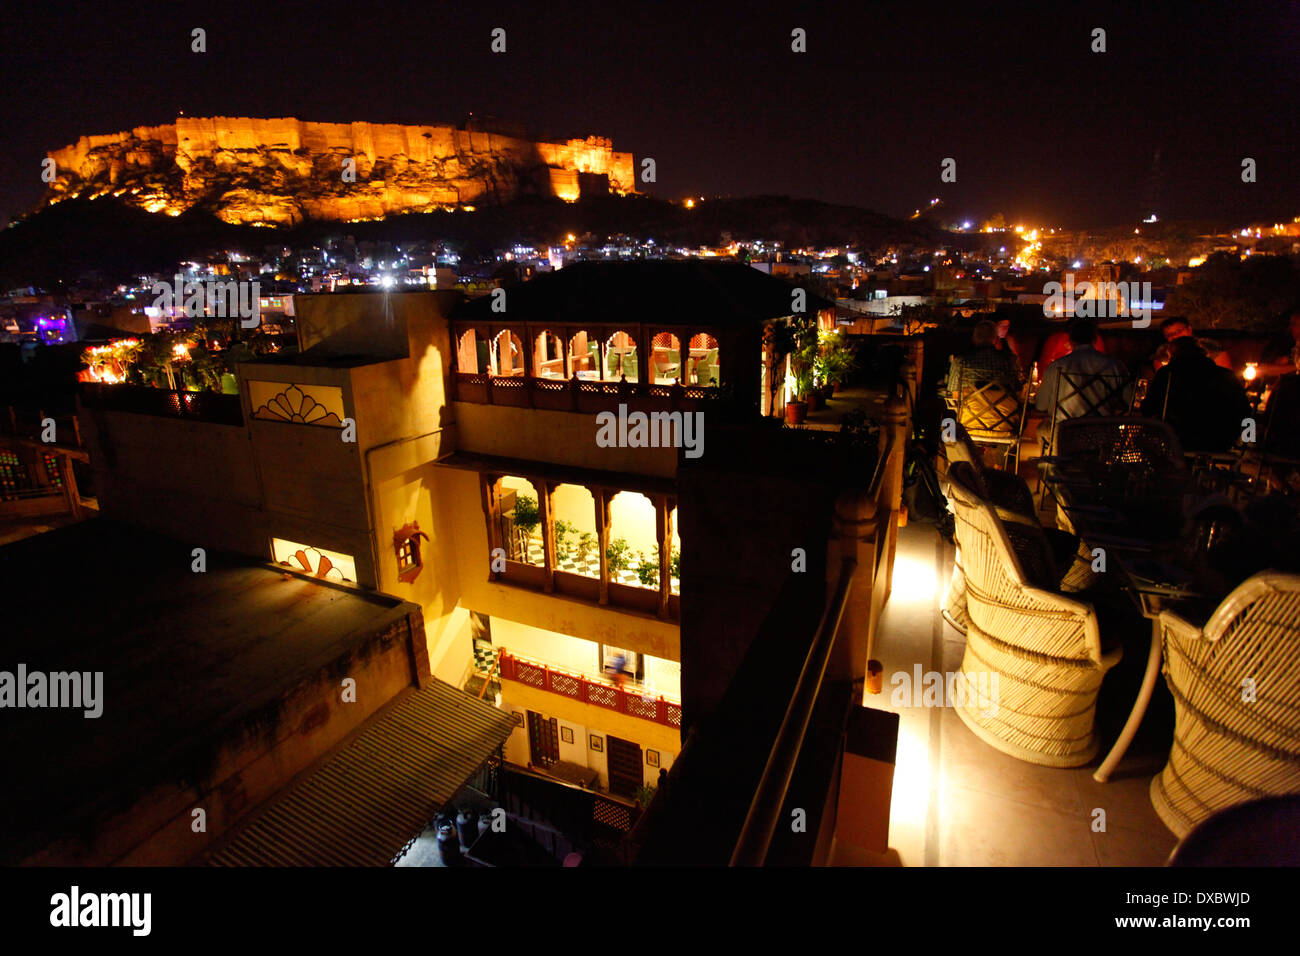 View of the 'Mehrangarh fort' at night from the 'Pal Haveli' restaurant terrace. Jodhpur, Rajasthan, India. Stock Photo